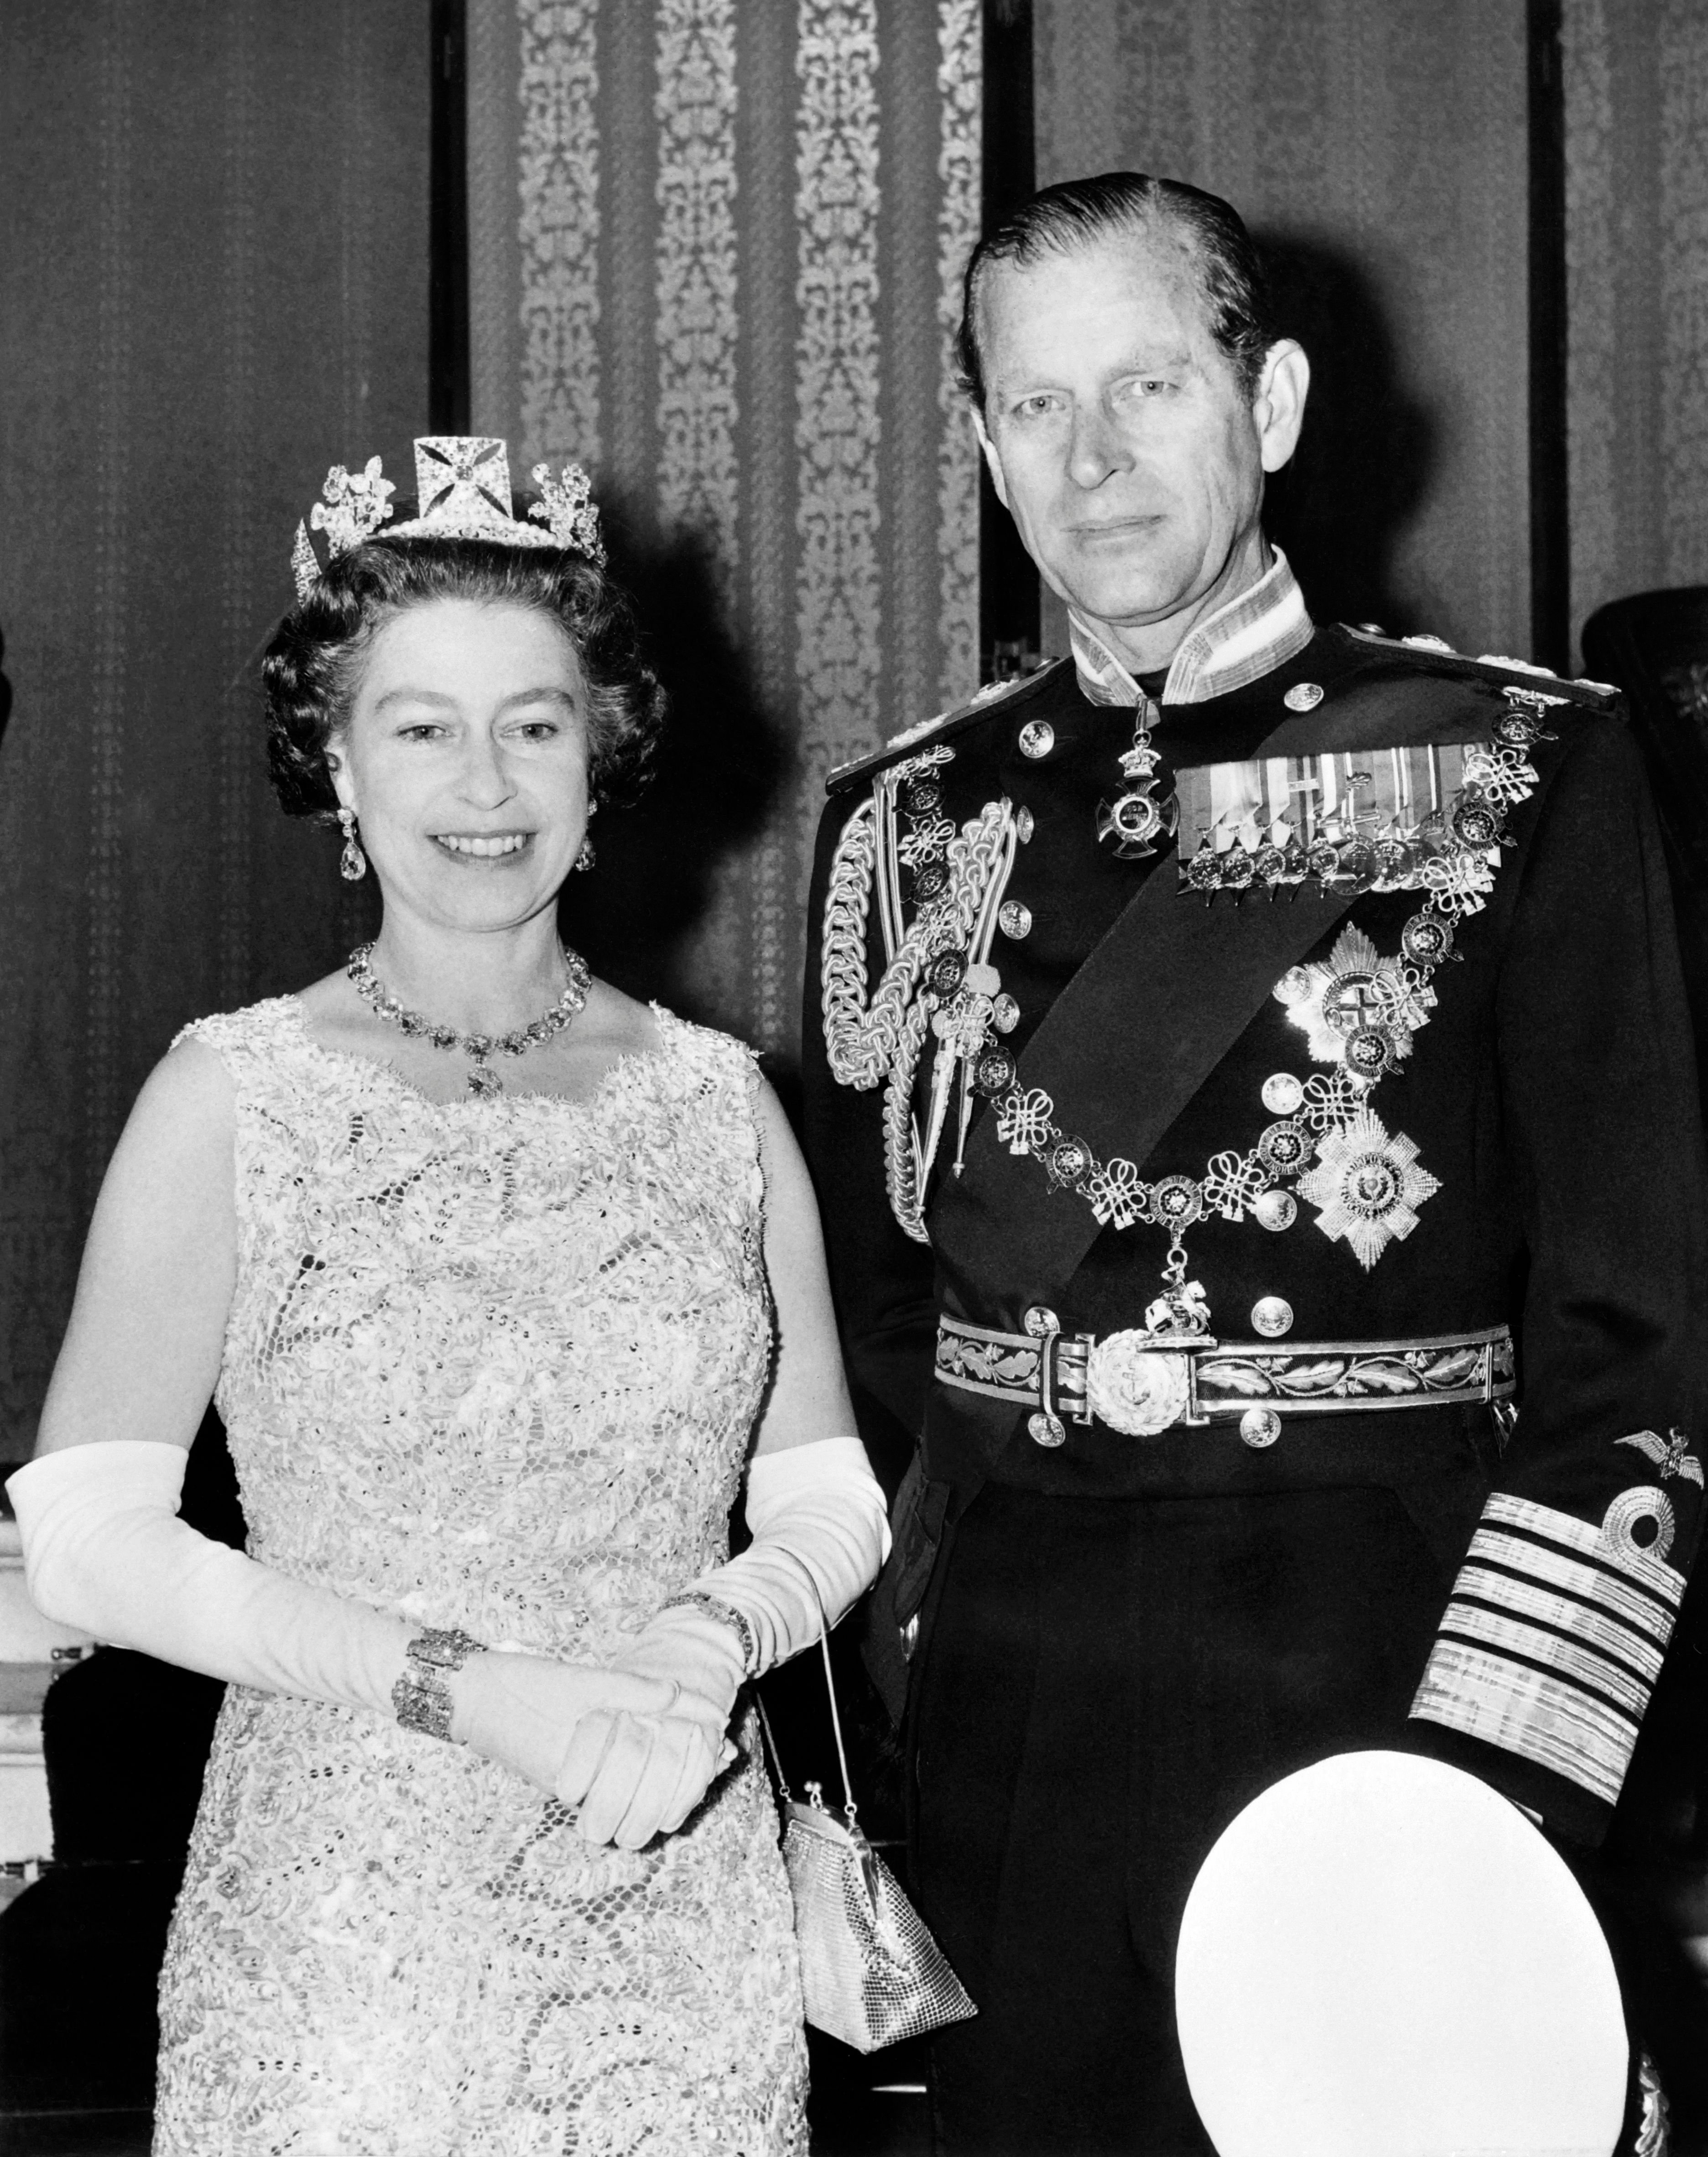 Britain's Queen Elizabeth II, wearing the George IV State Diadem, diamond tiara on British and Commonwealth stamps, and Prince Philip, Duke of Edinburgh, on their 25th wedding anniversary. | Source: Getty Images